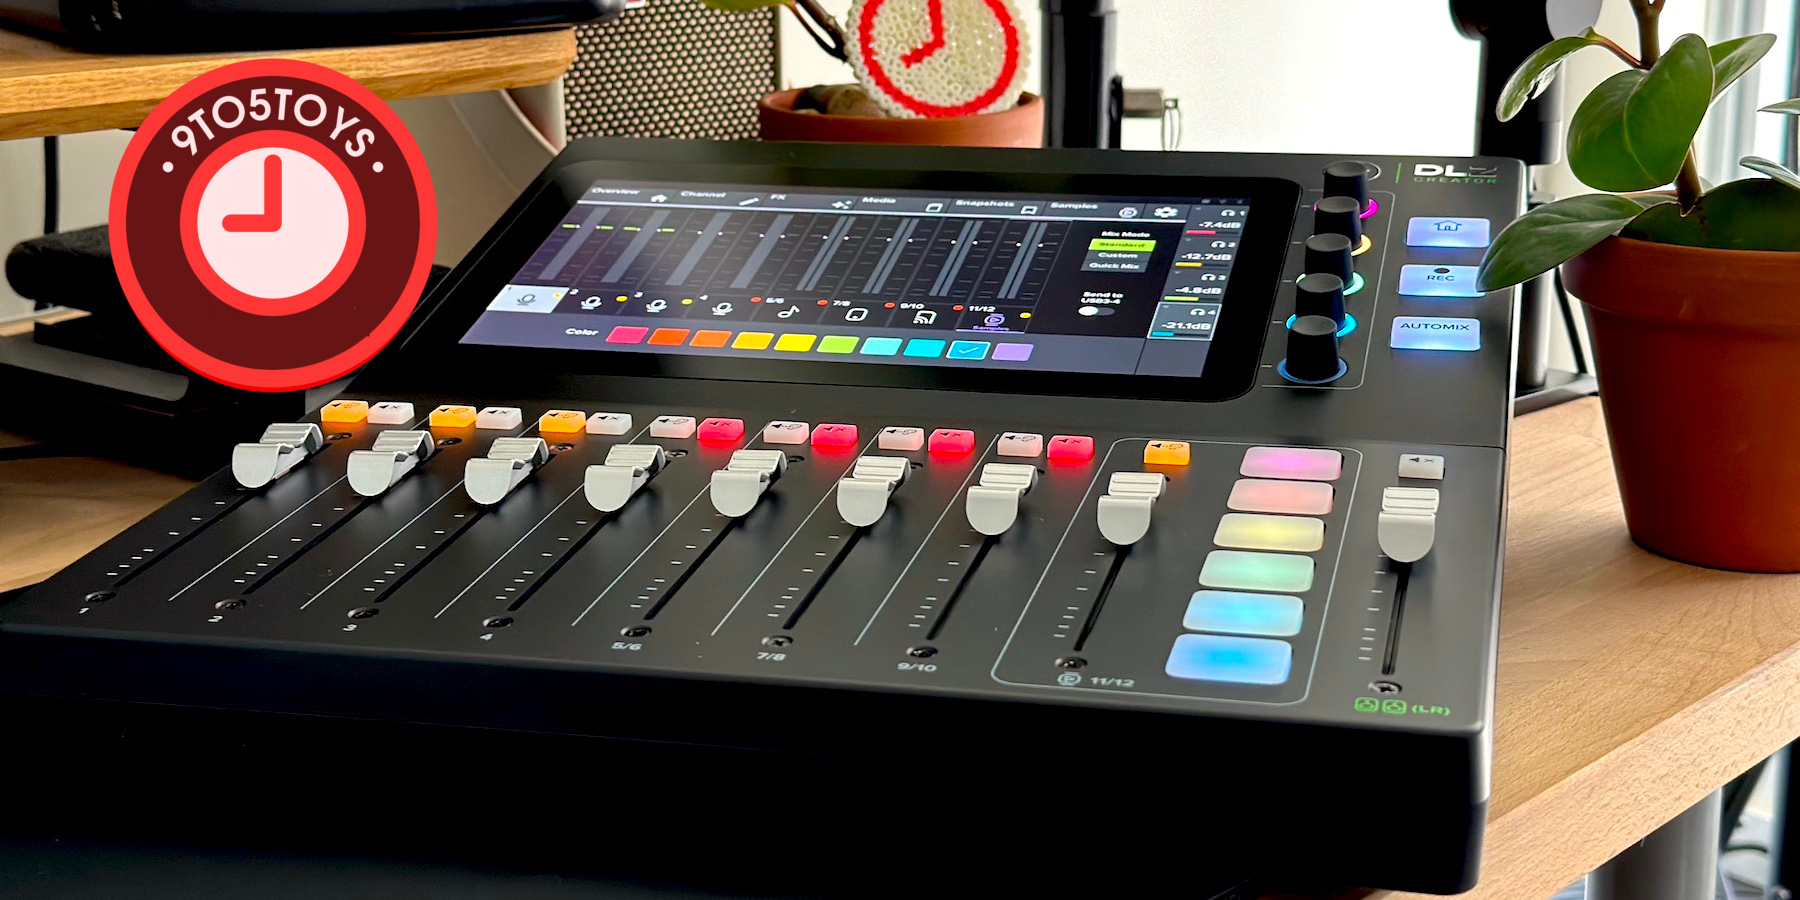 Hands-on with the new Mackie DLZ Creator Adaptive Digital Mixer